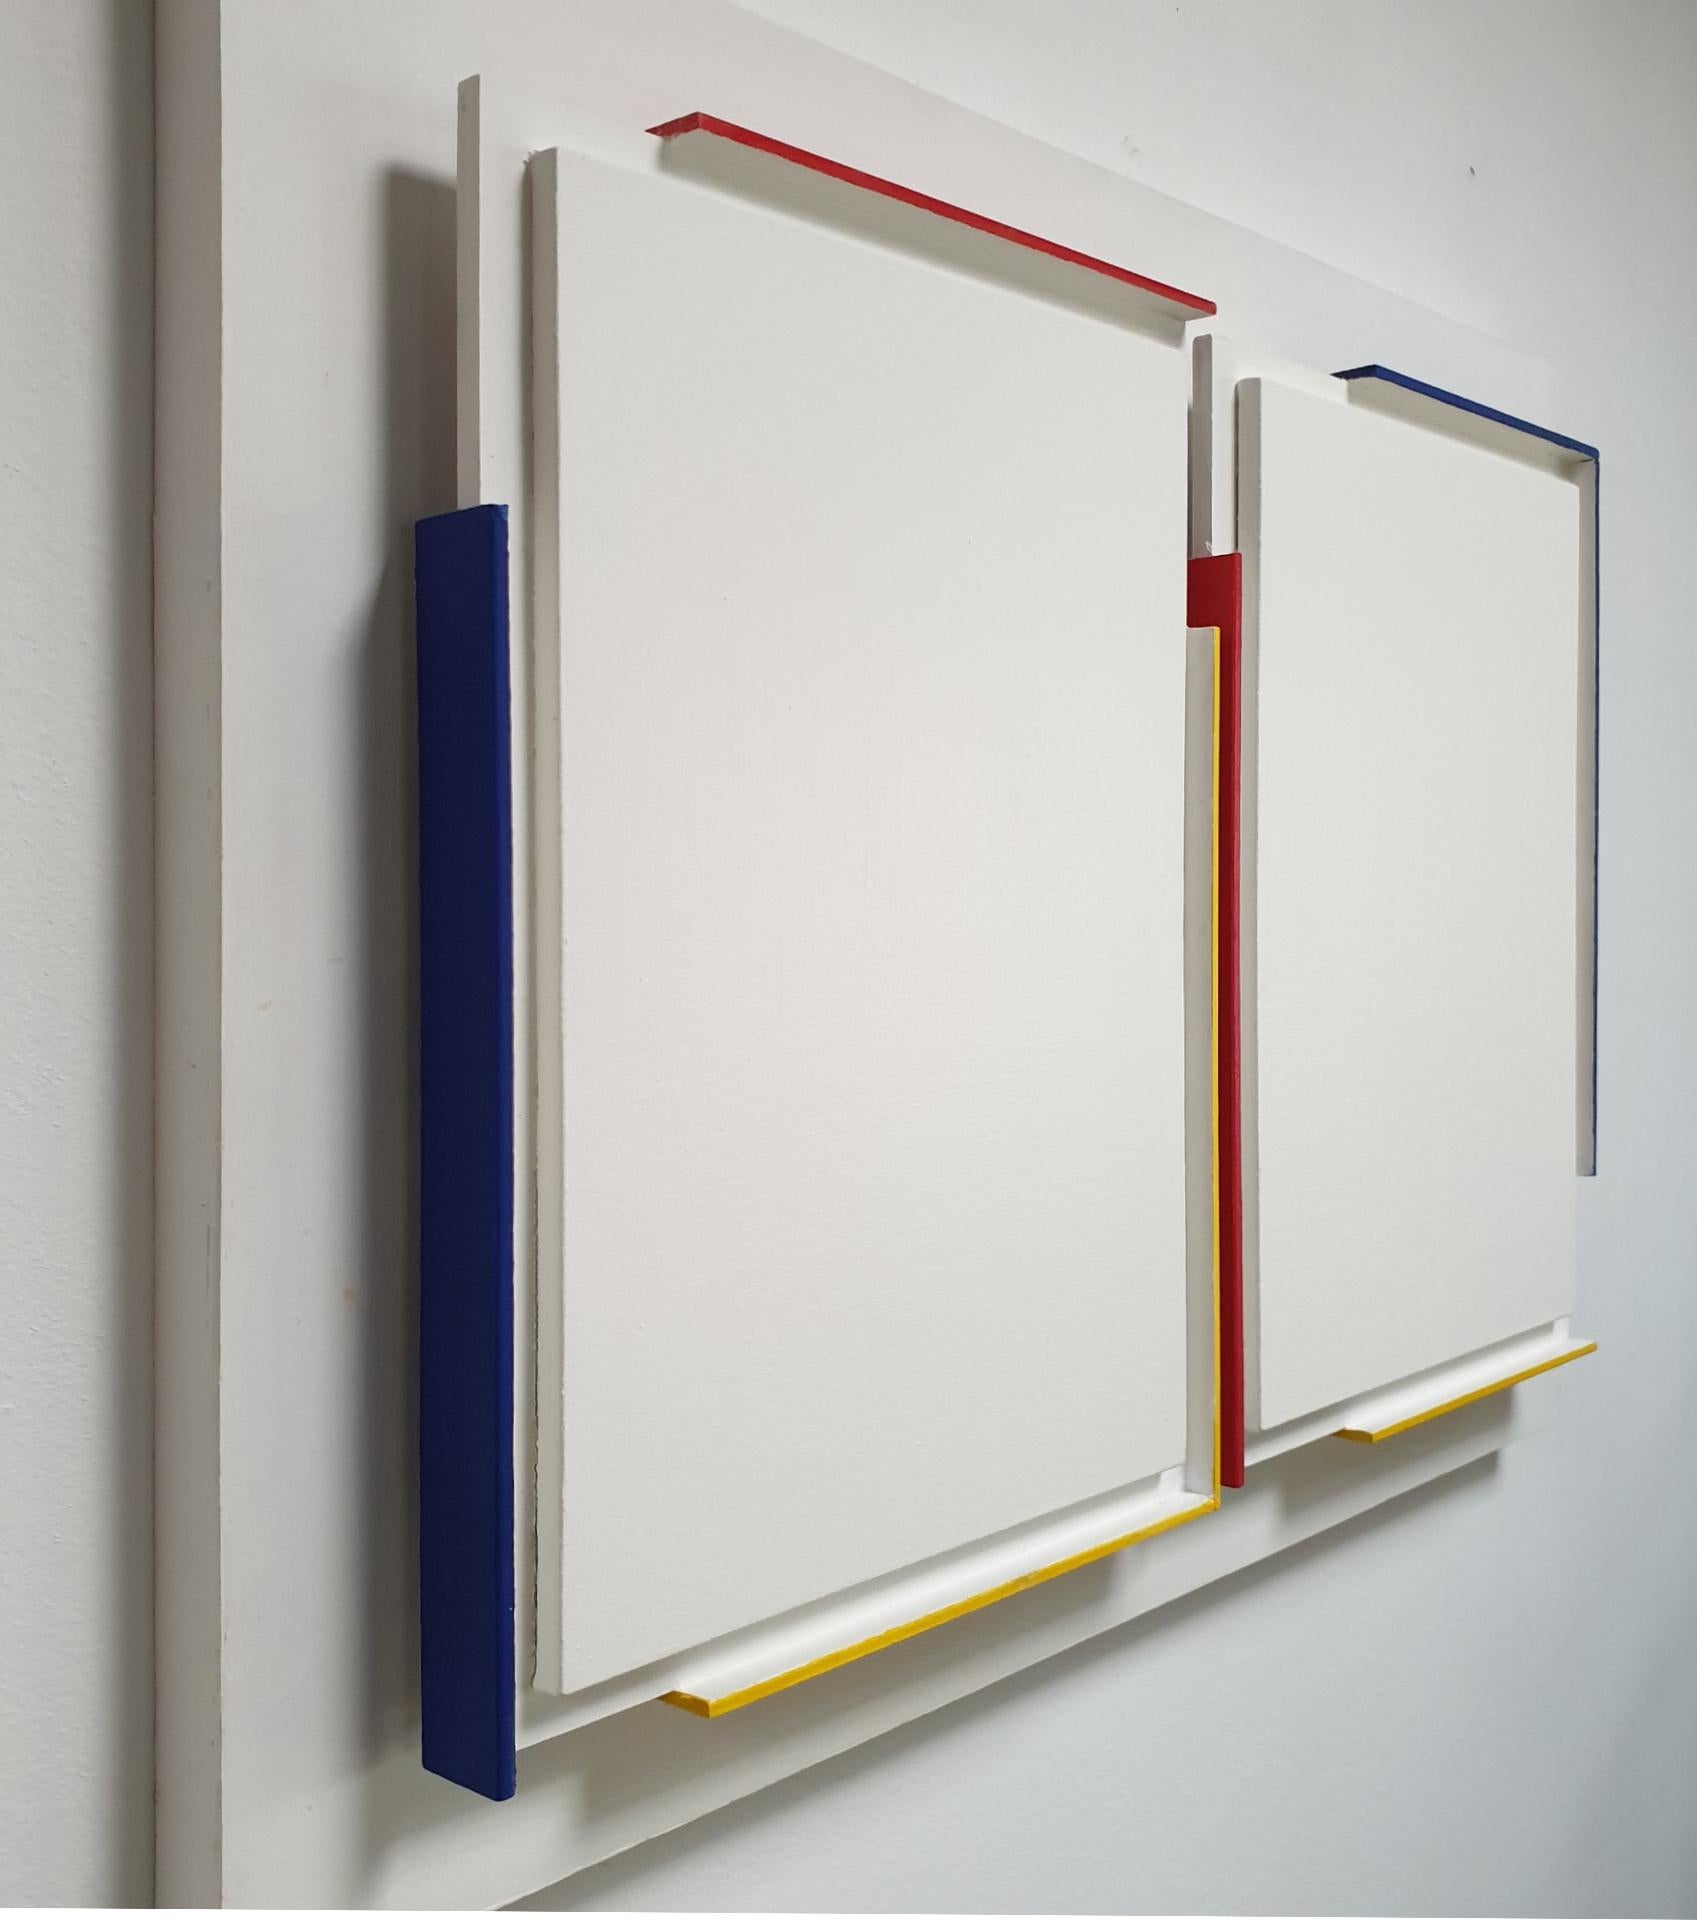 Double Contour du Blanc (artist inventory no. 811) is a unique medium size contemporary modern abstract geometric painting on wood panel relief by French artist Henri Prosi. This painting relief is a characteristic work from the final period of his